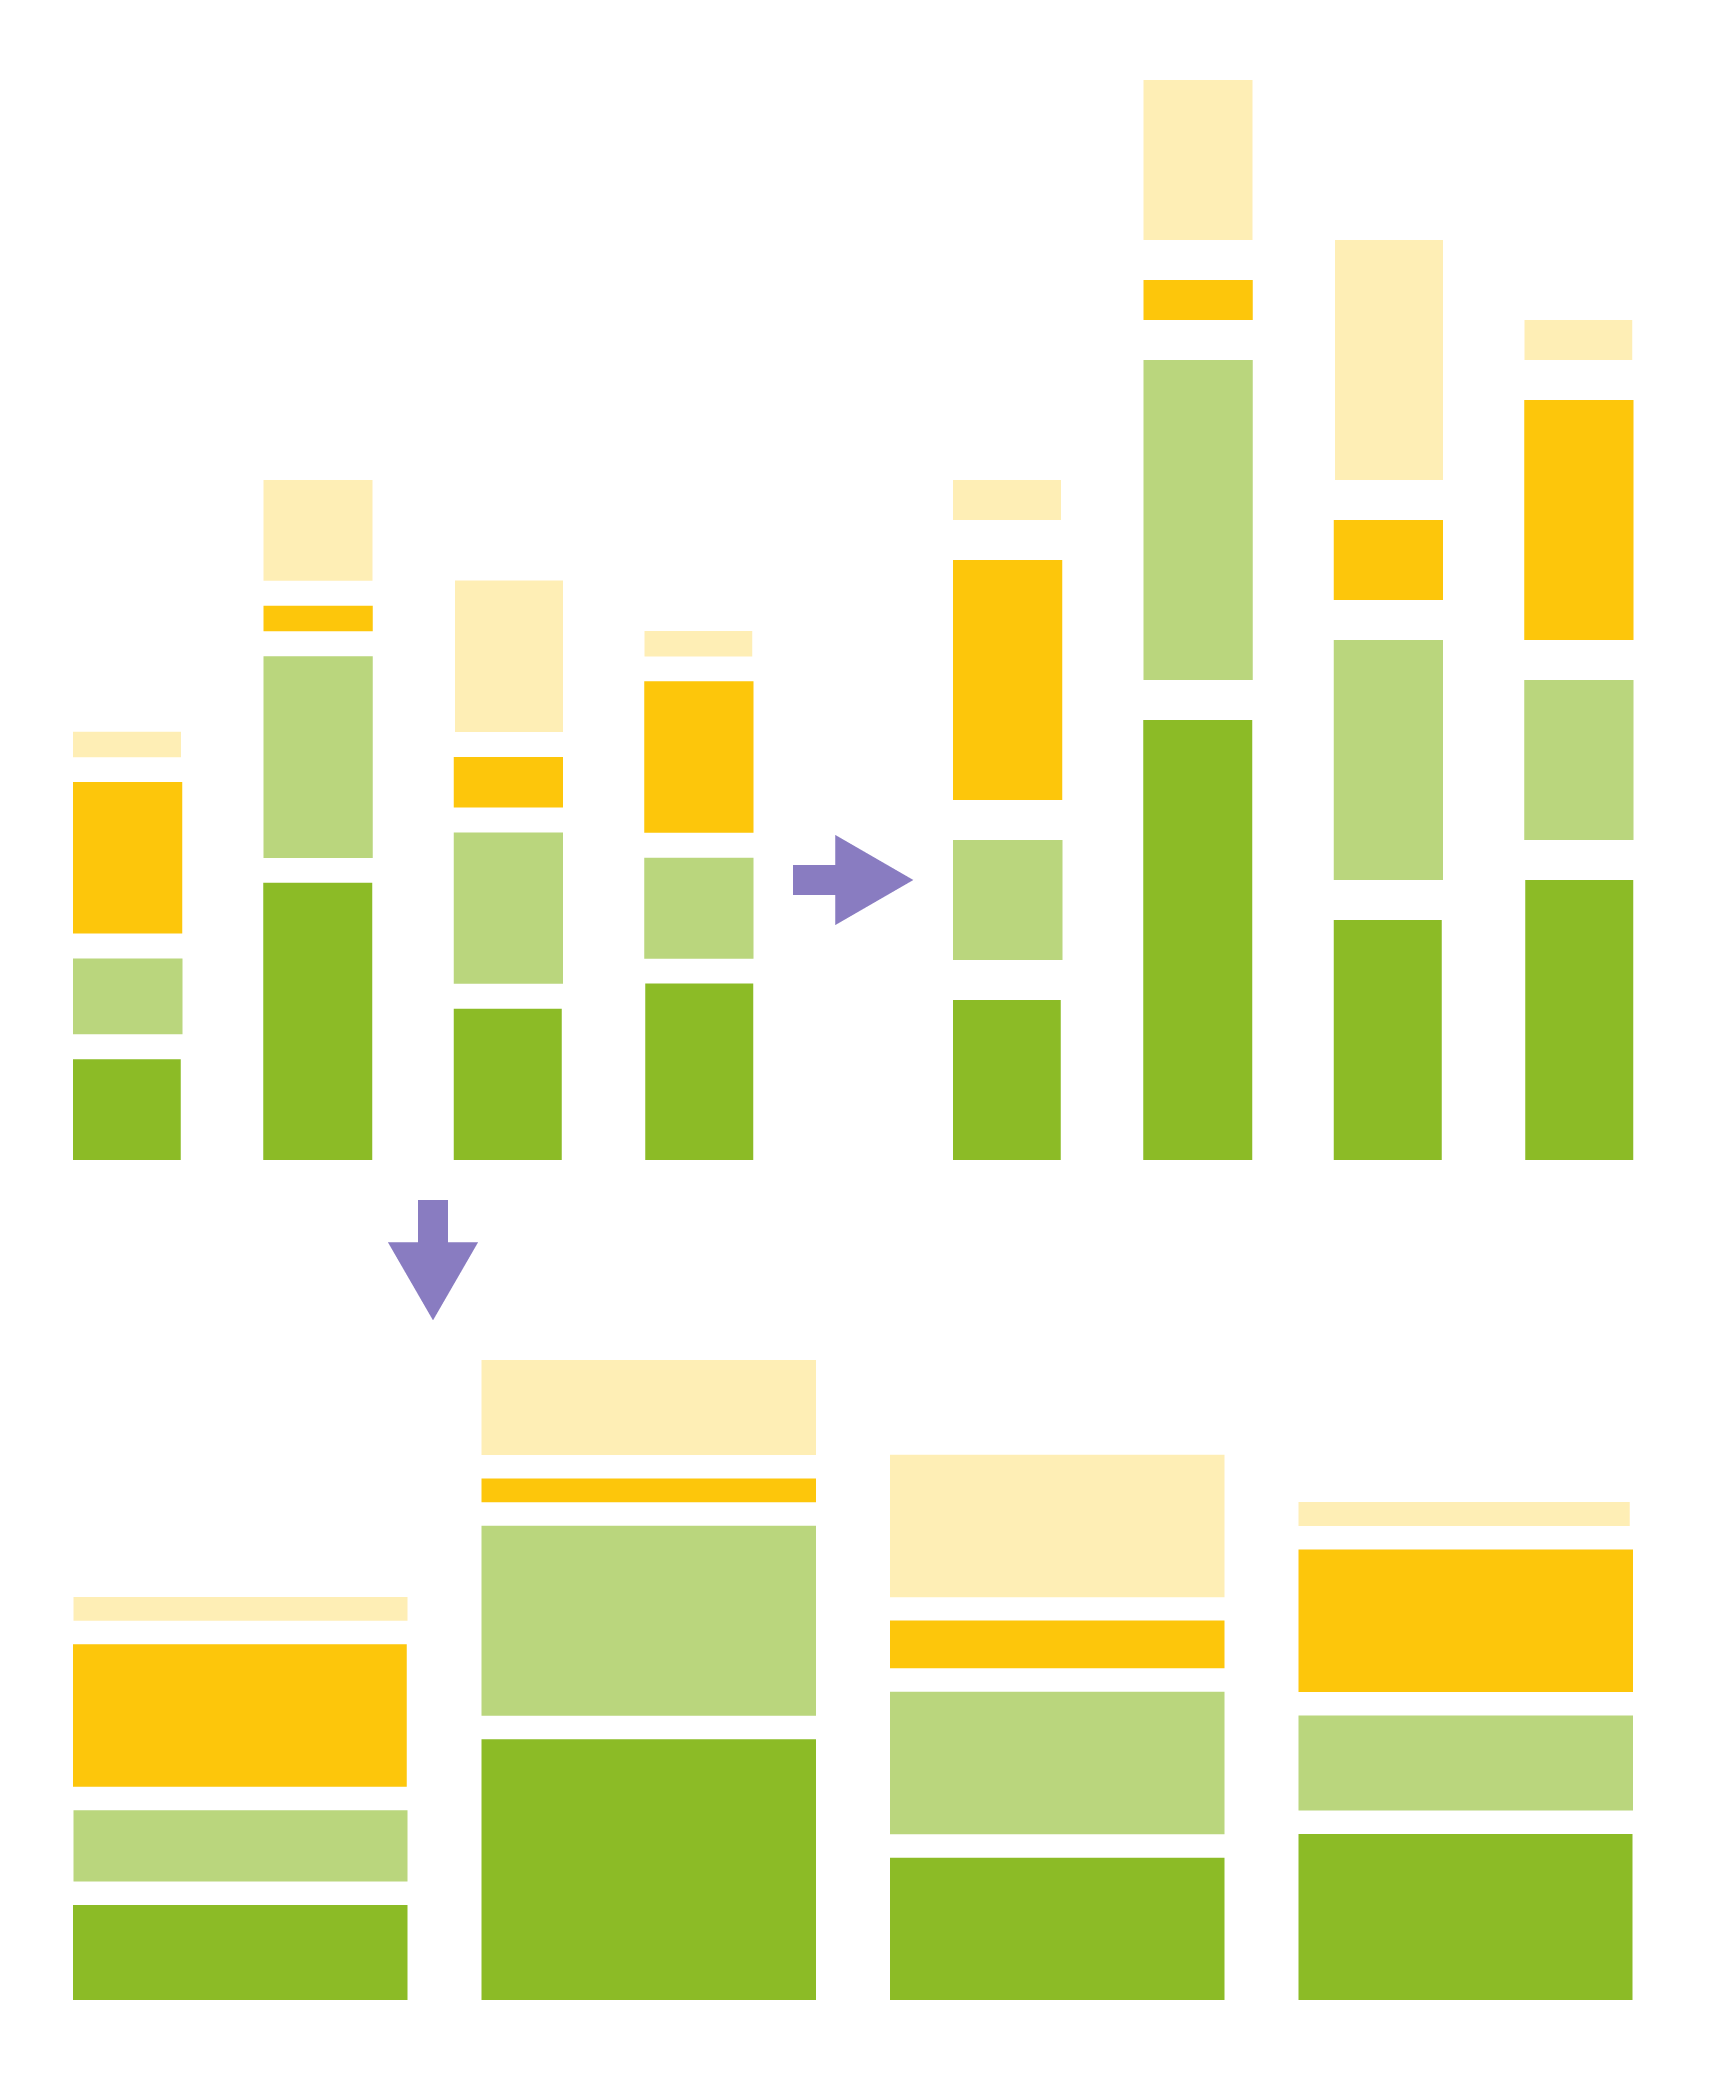 The visual shows a chart being resized twice into different shapes, which is only possible with Datylon for Illustrator.